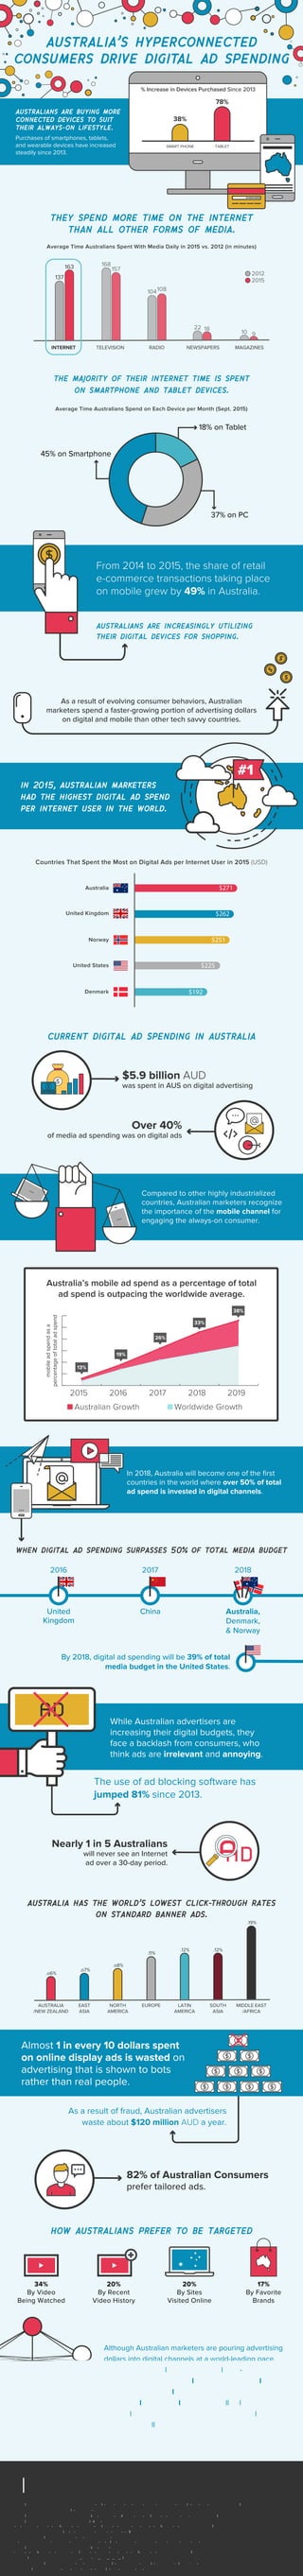 they spend more time on the internet
than all other forms of media.
the majority of their internet time is spent
on smartphone and tablet devices.
Although Australian marketers are pouring advertising
dollars into digital channels at a world-leading pace,
these ads often fail to engage the always-on
consumer. To get more value from their digital
investments, Australian marketers need better
addressable media solutions that will help them be
more relevant, target customers more precisely, and
improve overall advertising efficiency.
australians are increasingly utilizing
their digital devices for shopping.
Average Time Australians Spent With Media Daily in 2015 vs. 2012 (in minutes)
Average Time Australians Spend on Each Device per Month (Sept. 2015)
From 2014 to 2015, the share of retail
e-commerce transactions taking place
on mobile grew by 49% in Australia.
in 2015, australian marketers
had the highest digital ad spend
per internet user in the world.
Australia’s mobile ad spend as a percentage of total
ad spend is outpacing the worldwide average.
#1
INTERNET
163
137
TELEVISION
168
157
RADIO
108104
MAGAZINES
10 9
NEWSPAPERS
1822
2012
2015
Countries That Spent the Most on Digital Ads per Internet User in 2015 (USD)
$271Australia
United Kingdom
Norway
United States
Denmark
$262
$251
$225
$192
current digital ad spending in australia
Over 40%
of media ad spending was on digital ads
$5.9 billion AUD
was spent in AUS on digital advertising
when digital ad spending surpasses 50% of total media budget
United
Kingdom
Australia,
Denmark,
& Norway
2016
China
2017 2018
As a result of evolving consumer behaviors, Australian
marketers spend a faster-growing portion of advertising dollars
on digital and mobile than other tech savvy countries.
In 2018, Australia will become one of the ﬁrst
countries in the world where over 50% of total
ad spend is invested in digital channels.
While Australian advertisers are
increasing their digital budgets, they
face a backlash from consumers, who
think ads are irrelevant and annoying.
2015 2016 2017 2018 2019
Australian Growth Worldwide Growth
mobileadspendasa
percentageoftotaladspend
13%
19%
26%
33%
38%
The use of ad blocking software has
jumped 81% since 2013.
SOURCES:
http://totalaccess.emarketer.com/view/Chart/Average-Daily-Time-Spent-with-Media-Among-Consumers-Australia-2011-2017-minutes/171898?ECID=TA1000
http://www.criteo.com/resources/mobile-commerce-report/
http://totalaccess.emarketer.com/view/Chart/Digital-Ad-Spending-per-Internet-User-Worldwide-by-Country-2013-2018/167879?ECID=TA1000
http://totalaccess.emarketer.com/view/Chart/Mobile-Inter-
net-Ad-Spending-Share-of-Total-Media-Ad-Spending-Worldwide-by-Country-2013-2019-of-total-media-ad-spending/167841?ECID=TA1000
http://prwire.com.au/pr/58326/online-ad-expenditure-poised-to-break-6-billion
https://www.iabaustralia.com.au/research-and-resources/adver-
tising-expenditure/item/11-advertising-expenditure/1995-iab-online-advertising-expenditure-report-quarter-ended-june-2015
http://totalaccess.emarketer.com/view/Chart/Digital-Ad-Spend-
ing-Share-of-Total-Media-Ad-Spending-Worldwide-by-Country-2014-2019-of-total-media-ad-spending/176600?ECID=TA1000
http://downloads.pagefair.com/reports/2015_report-the_cost_of_ad_blocking.pdf
https://www.iabaustralia.com.au/research-and-resources/nickable-charts/item/34-nickable-charts/1930-calendar-year-2015
https://integralads.com/news/ad-fraud-worth-120m-in-australia-fraud-detection-ﬁrm-estimates/
Nearly 1 in 5 Australians
will never see an Internet
ad over a 30-day period.
Compared to other highly industrialized
countries, Australian marketers recognize
the importance of the mobile channel for
engaging the always-on consumer.
australia has the world’s lowest click-through rates
on standard banner ads.
NORTH
AMERICA
LATIN
AMERICA
EUROPE MIDDLE EAST
/AFRICA
AUSTRALIA
/NEW ZEALAND
EAST
ASIA
SOUTH
ASIA
.o6%
.o7%
.o8%
.11%
.12% .12%
.19%
australia’s hyperconnected
consumers drive digital ad spending
australians are buying more
connected devices to suit
their always-on lifestyle.
Purchases of smartphones, tablets,
and wearable devices have increased
steadily since 2013.
how australians prefer to be targeted
% Increase in Devices Purchased Since 2013
TABLET
78%
SMART PHONE
38%
18% on Tablet
45% on Smartphone
37% on PC
82% of Australian Consumers
prefer tailored ads.
34%
By Video
Being Watched
20%
By Sites
Visited Online
17%
By Favorite
Brands
20%
By Recent
Video History
As a result of fraud, Australian advertisers
waste about $120 million AUD a year.
Almost 1 in every 10 dollars spent
on online display ads is wasted on
advertising that is shown to bots
rather than real people.
By 2018, digital ad spending will be 39% of total
media budget in the United States.
 